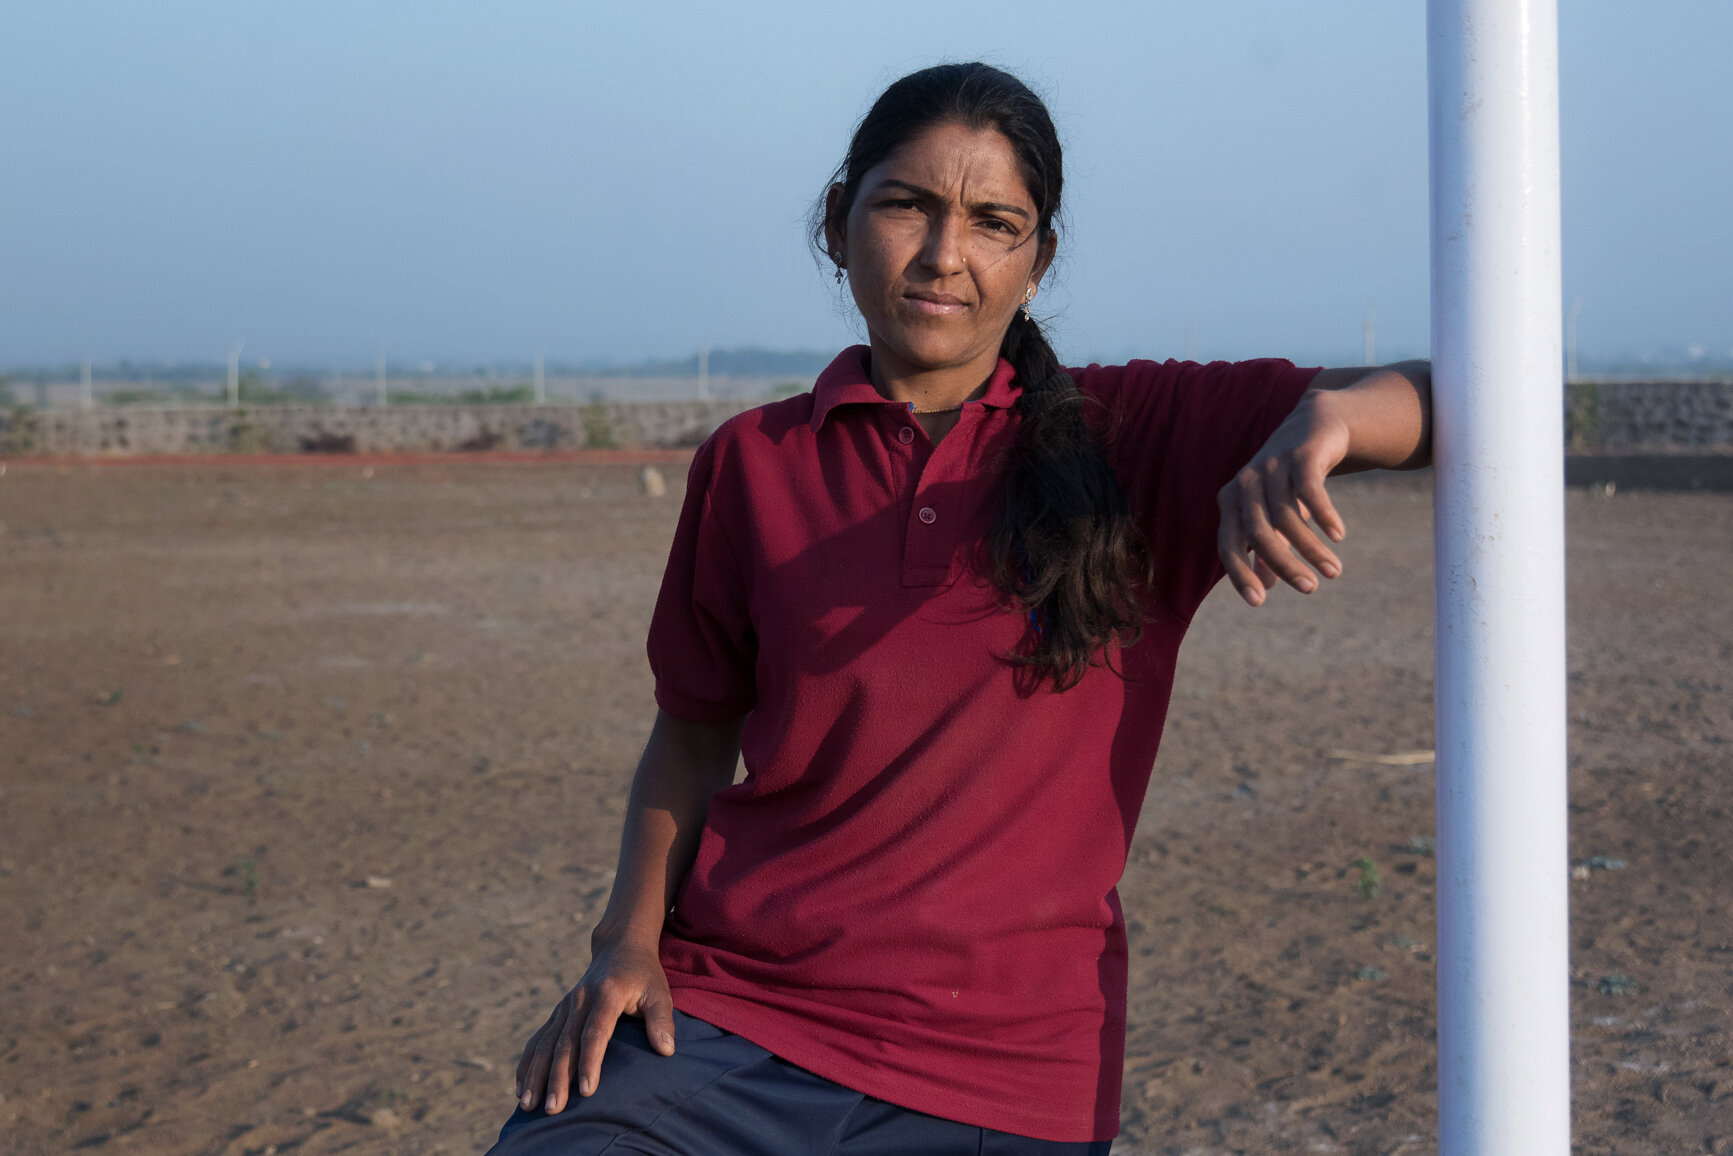  Banu Bangar is the only female coach, out of three coaches, in the Mann Deshi Champions Sports Program. The program aims to empower rural girls and give them the opportunity to broaden their skills physically and socially through sports. Banu comes 